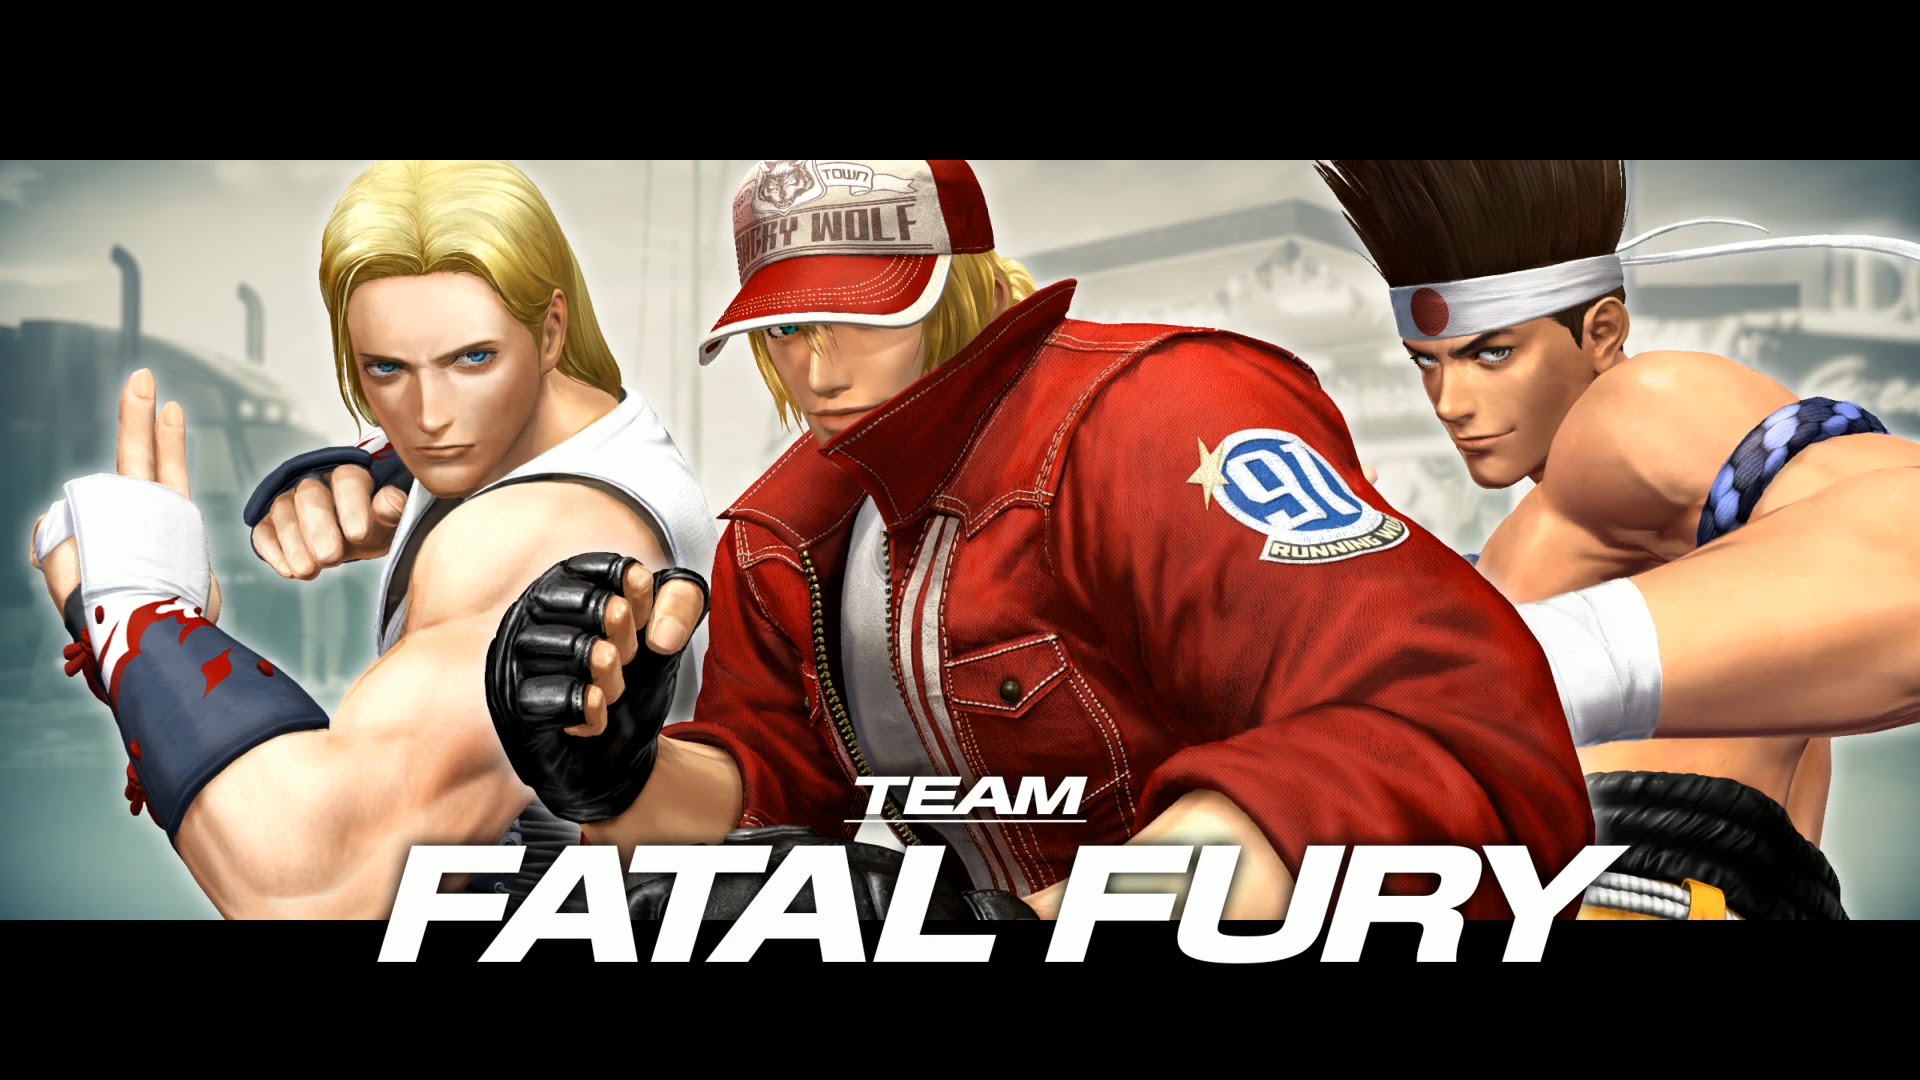 The King of Fighters XIV: Team Fatal Fury